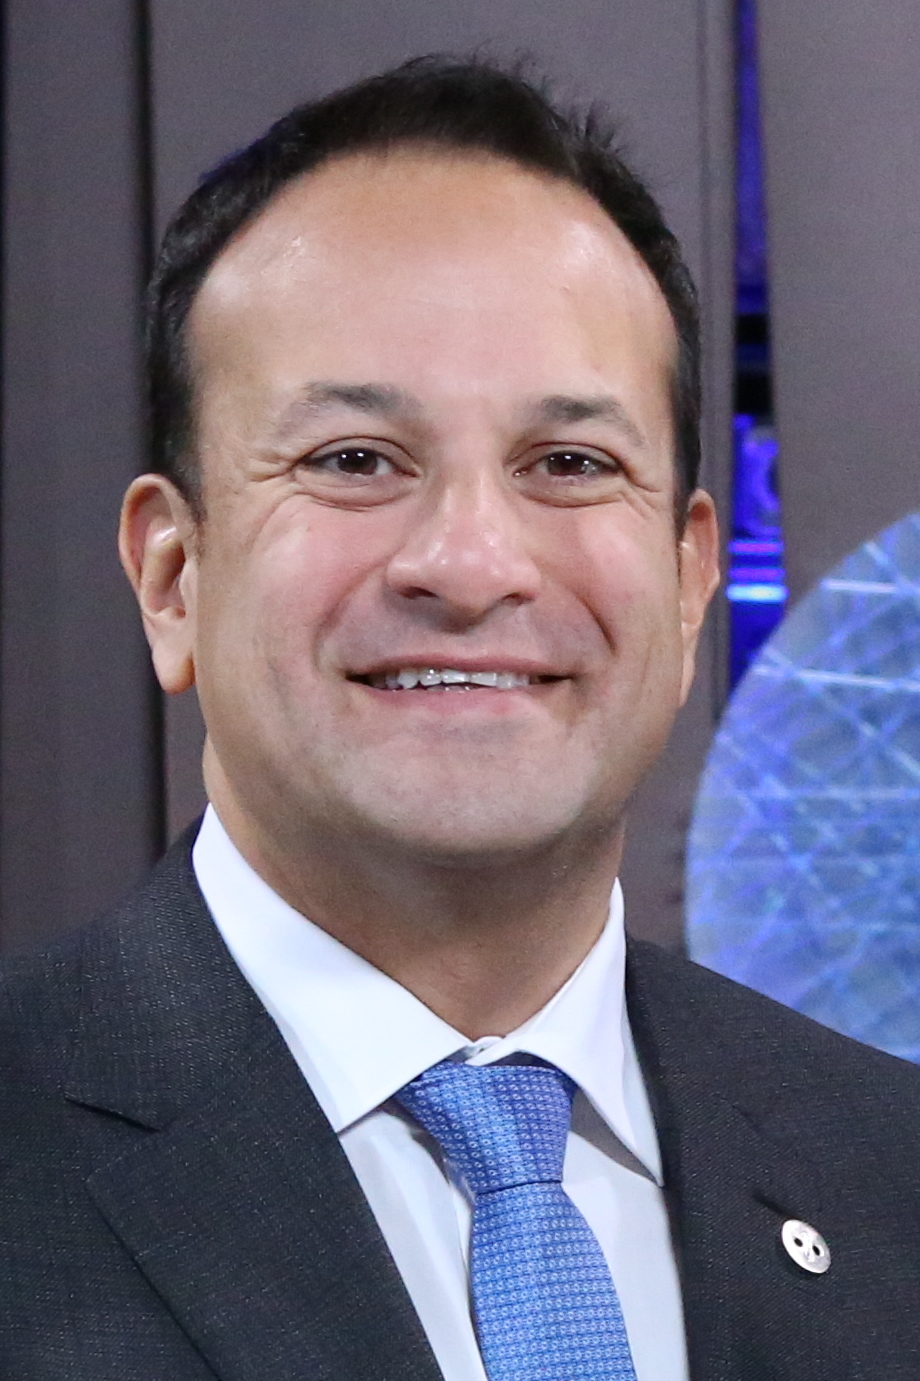 UPDATE 1-Brexit: Irish PM says no backstop as bad for Ireland as no deal